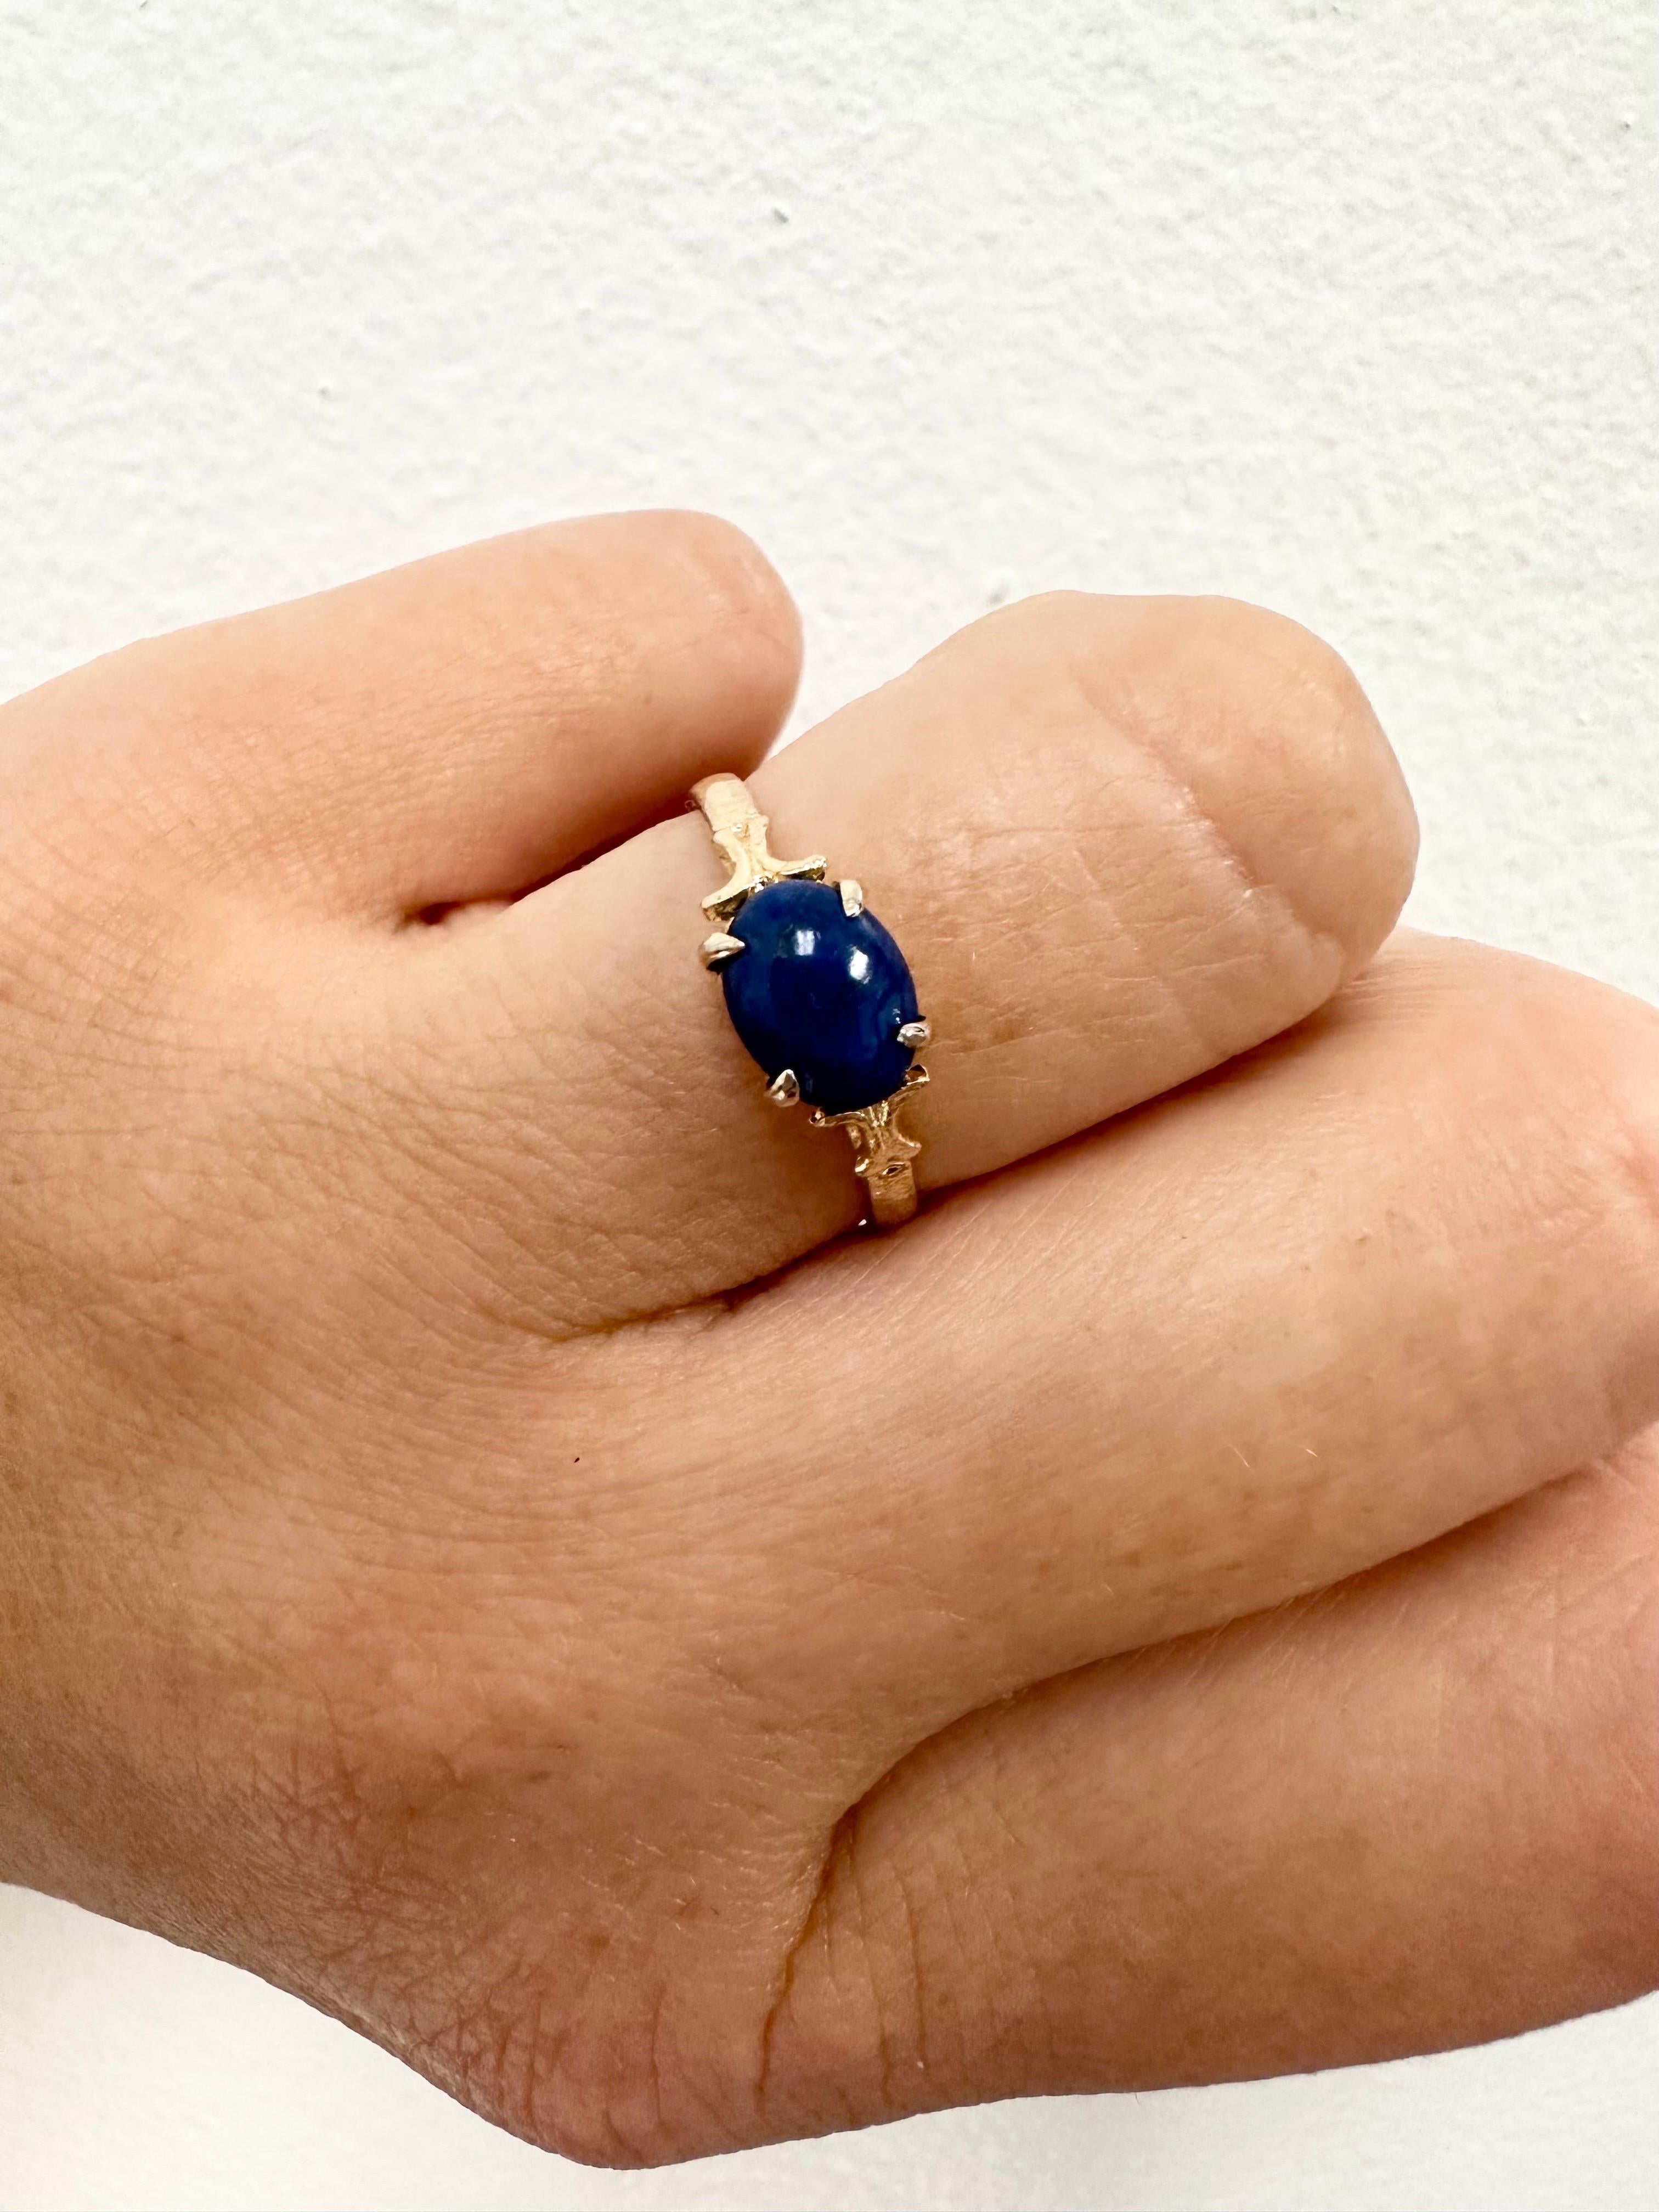 Vintage Lapis Lazuli yellow gold ring size 7.5 In Excellent Condition For Sale In Boca Raton, FL